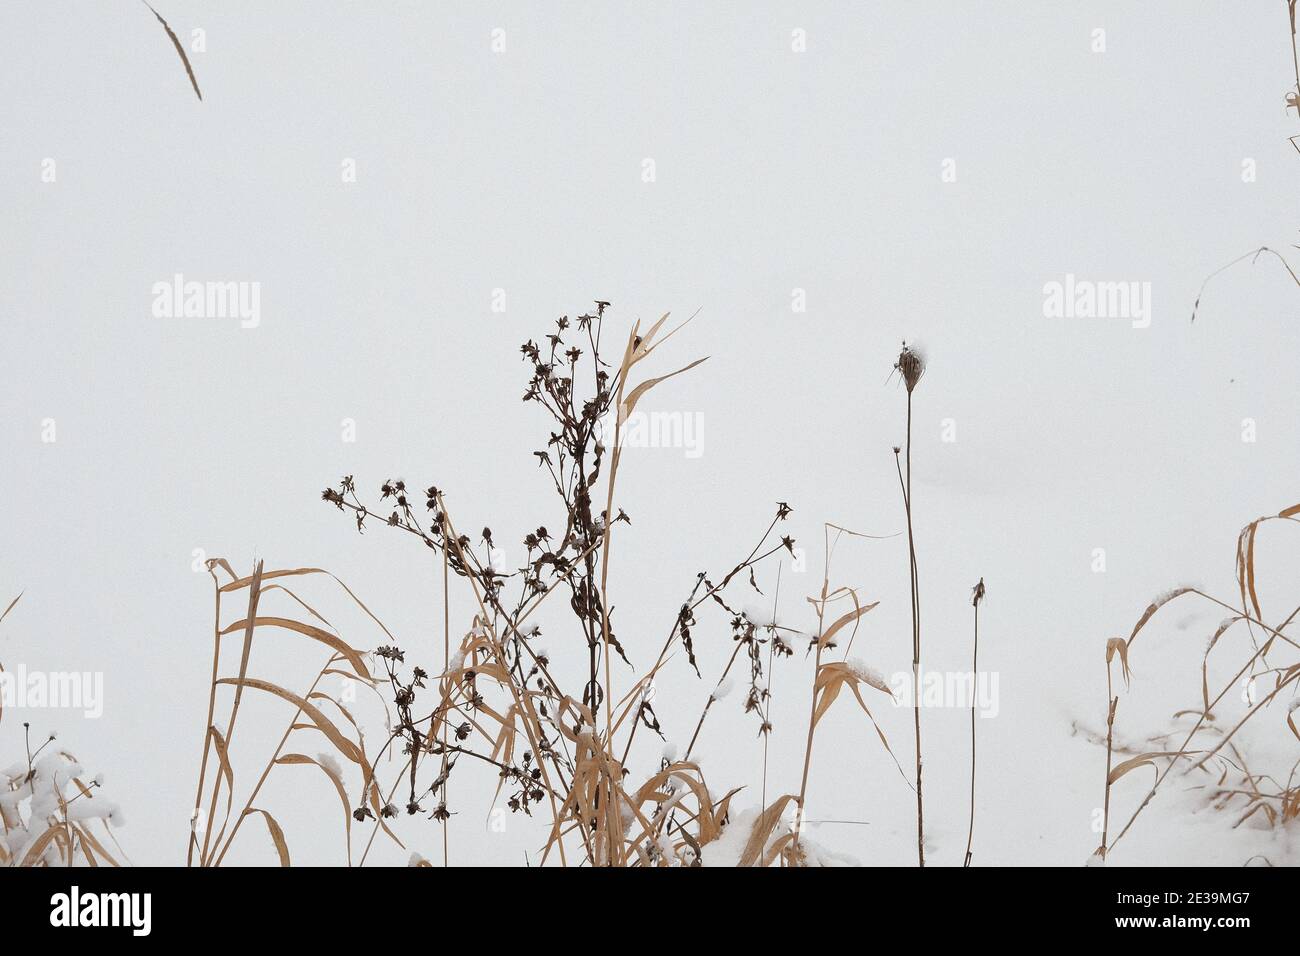 Dried winter wetland grasses line a frozen and snow covered Dow's Lake in mid-winter in Ottawa, Ontario, Canada. Stock Photo